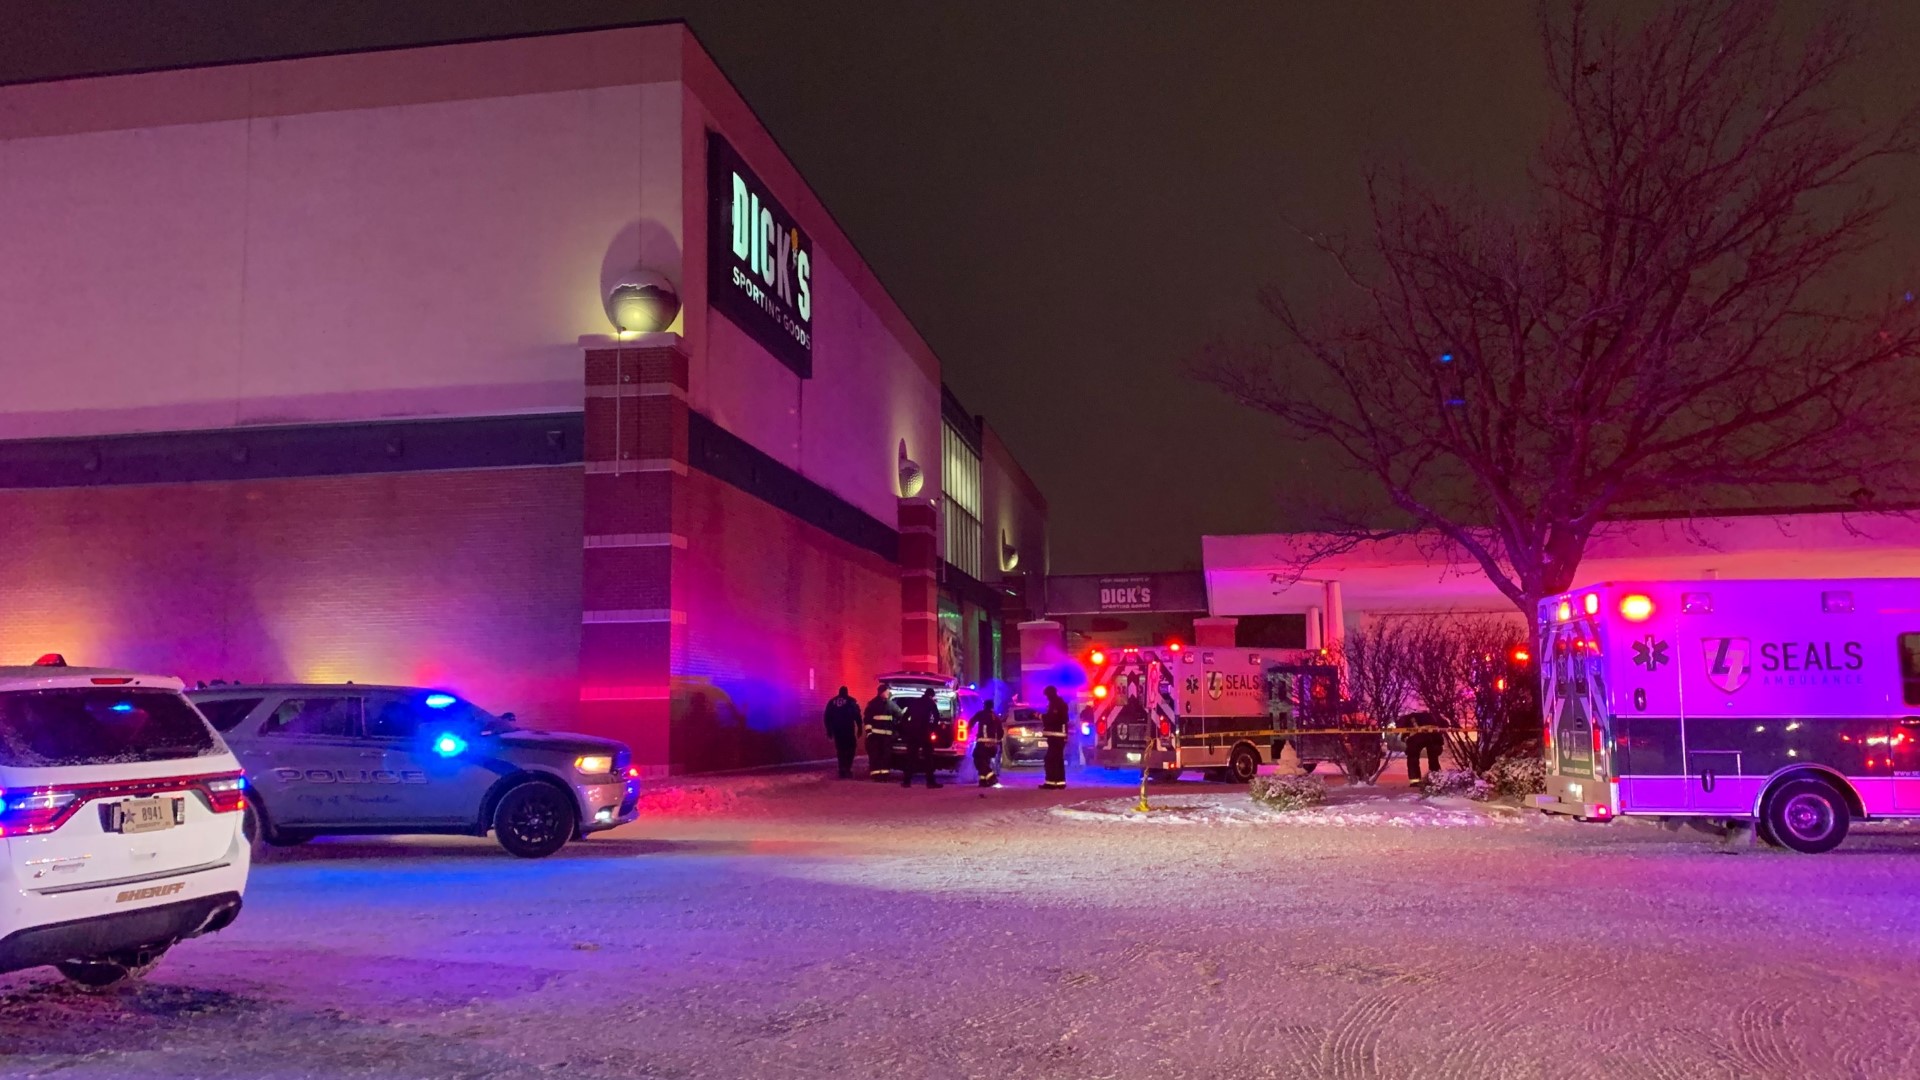 Police said no shooting occurred inside Greenwood Park Mall, but that an altercation did happen outside on Friday night.